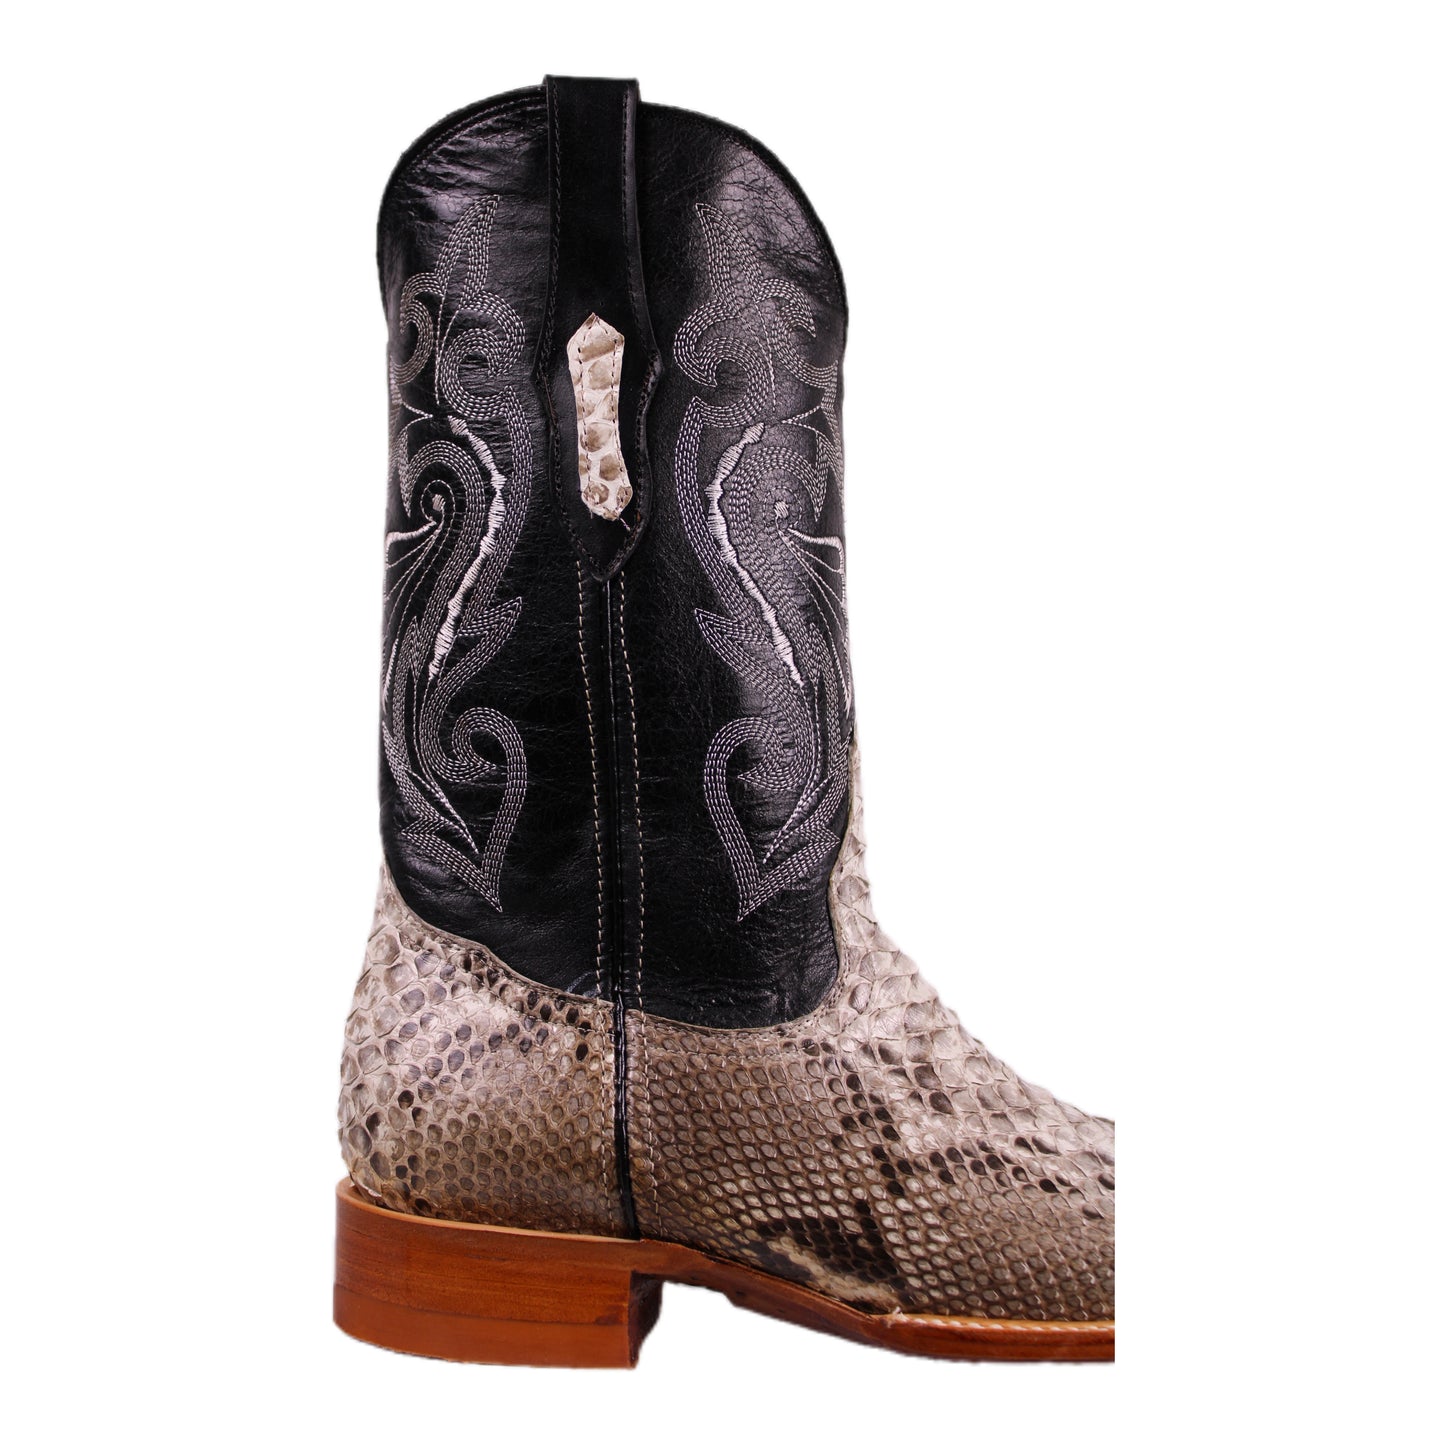 Diligencia Natural Exotic Leather Boot